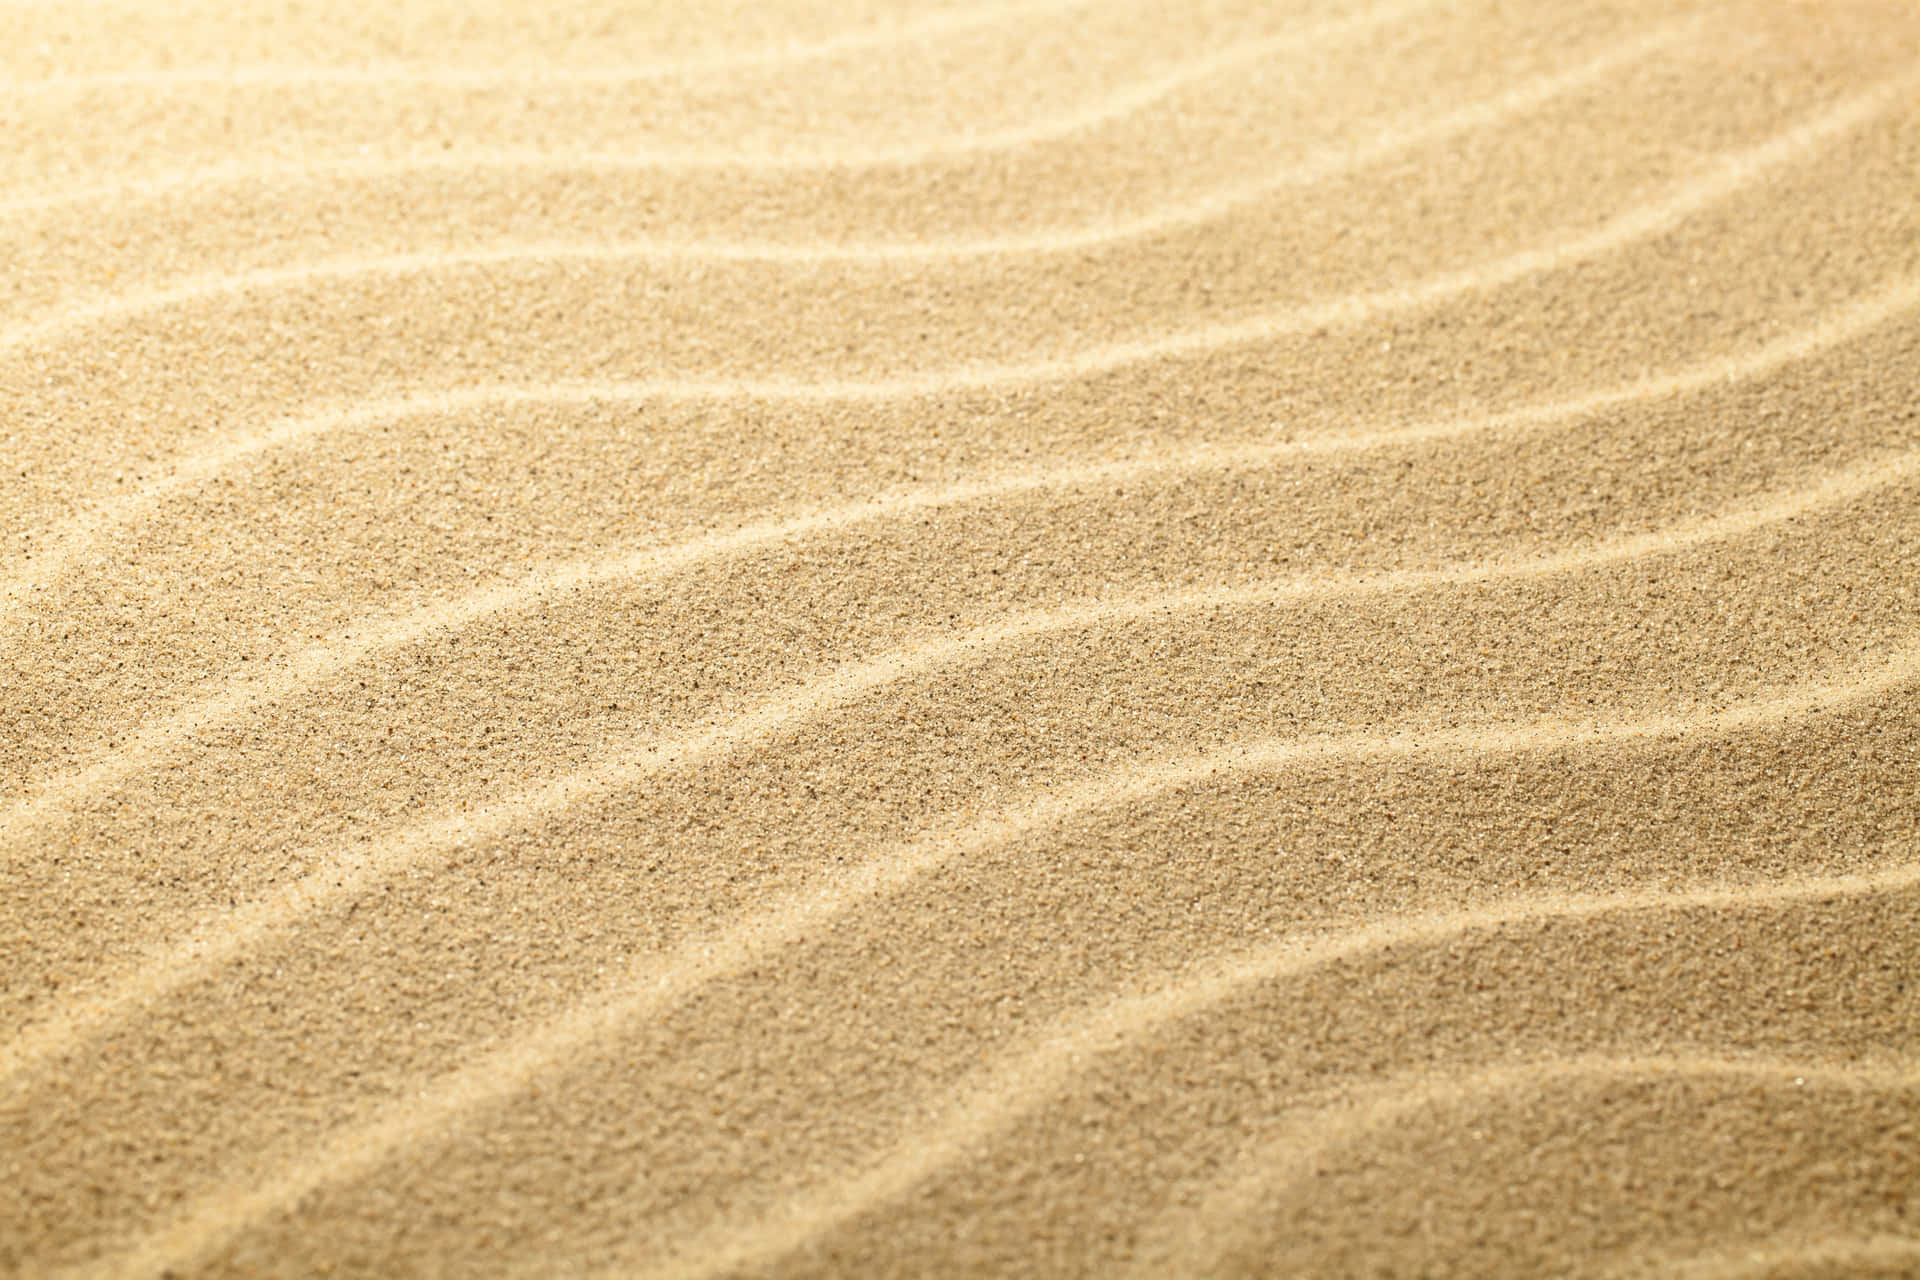 Be mesmerized by the flawless grains of sand